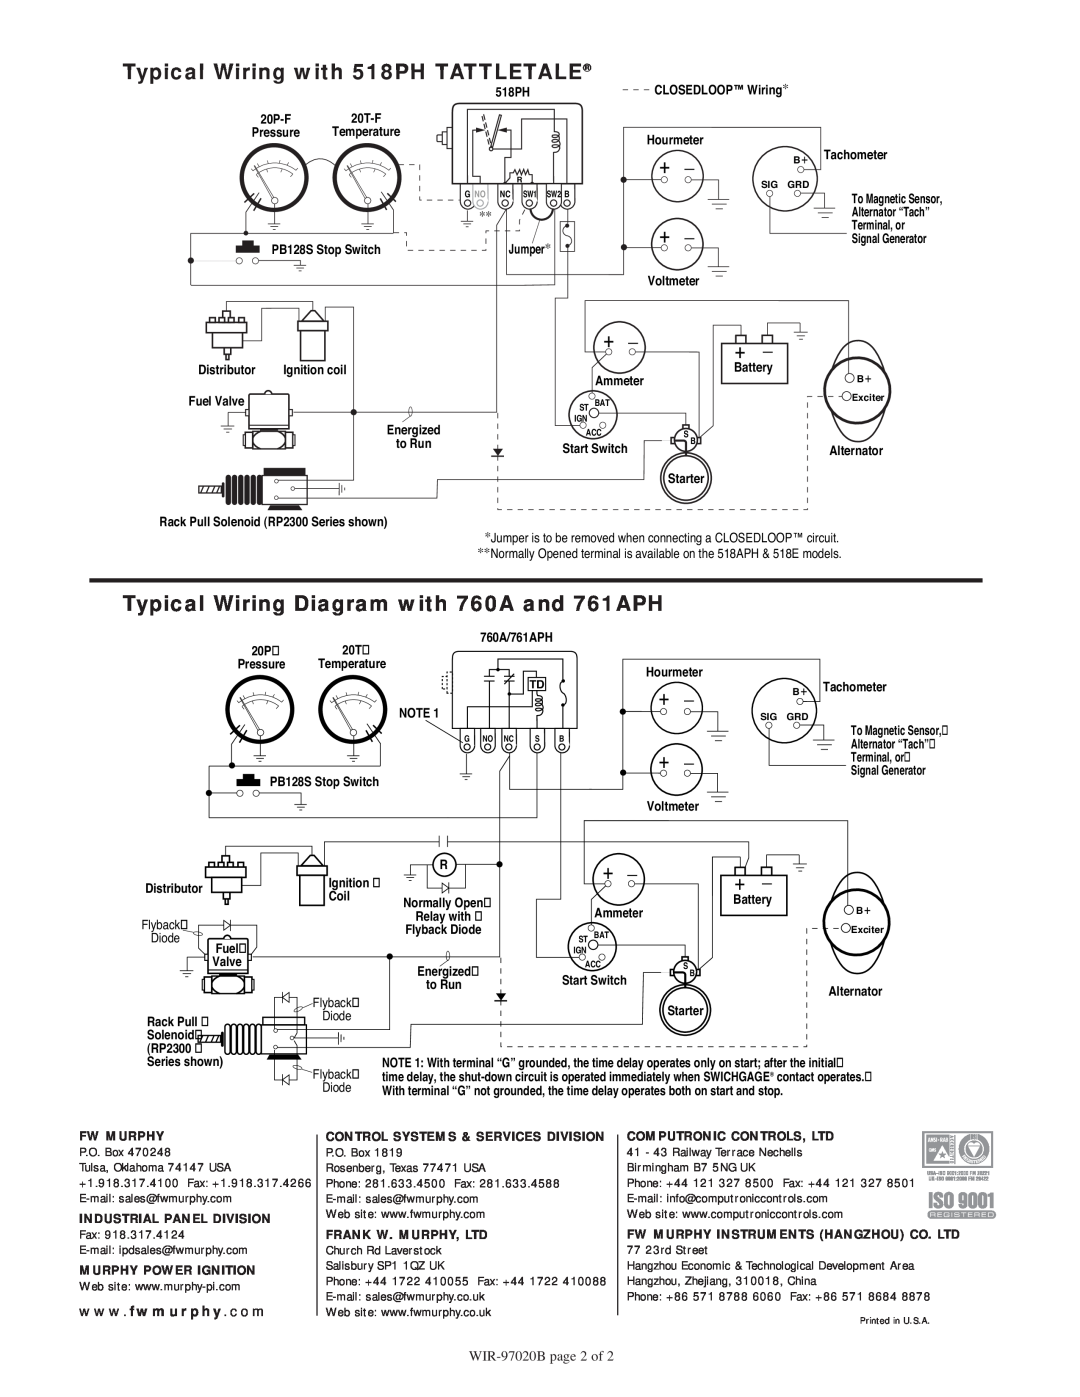 Murphy WIR-97020B Typical Wiring with 518PH TATTLETALE, Typical Wiring Diagram with 760A and 761APH, B + Tachometer, Diode 